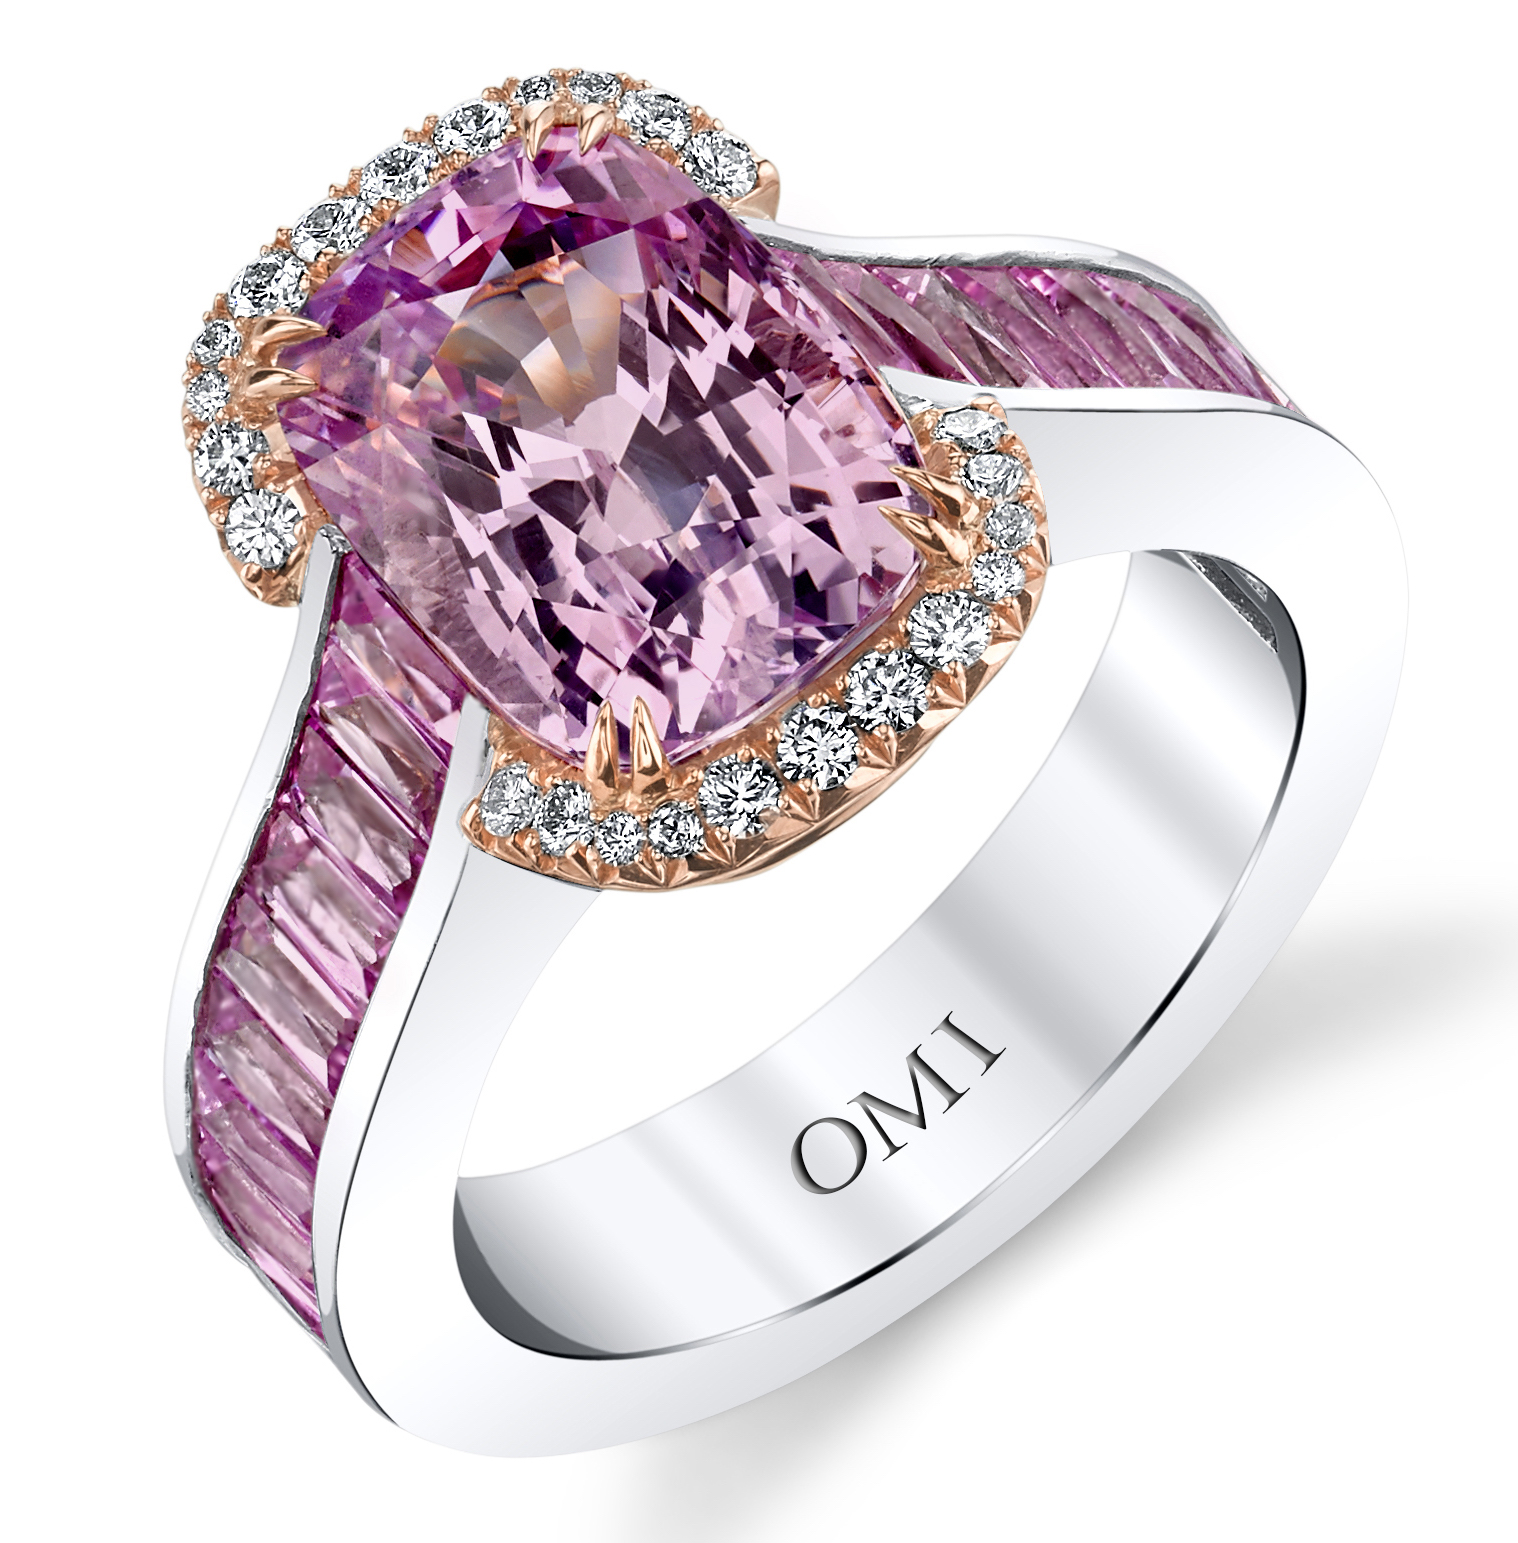 Omi Prive ring | JCK On Your Market